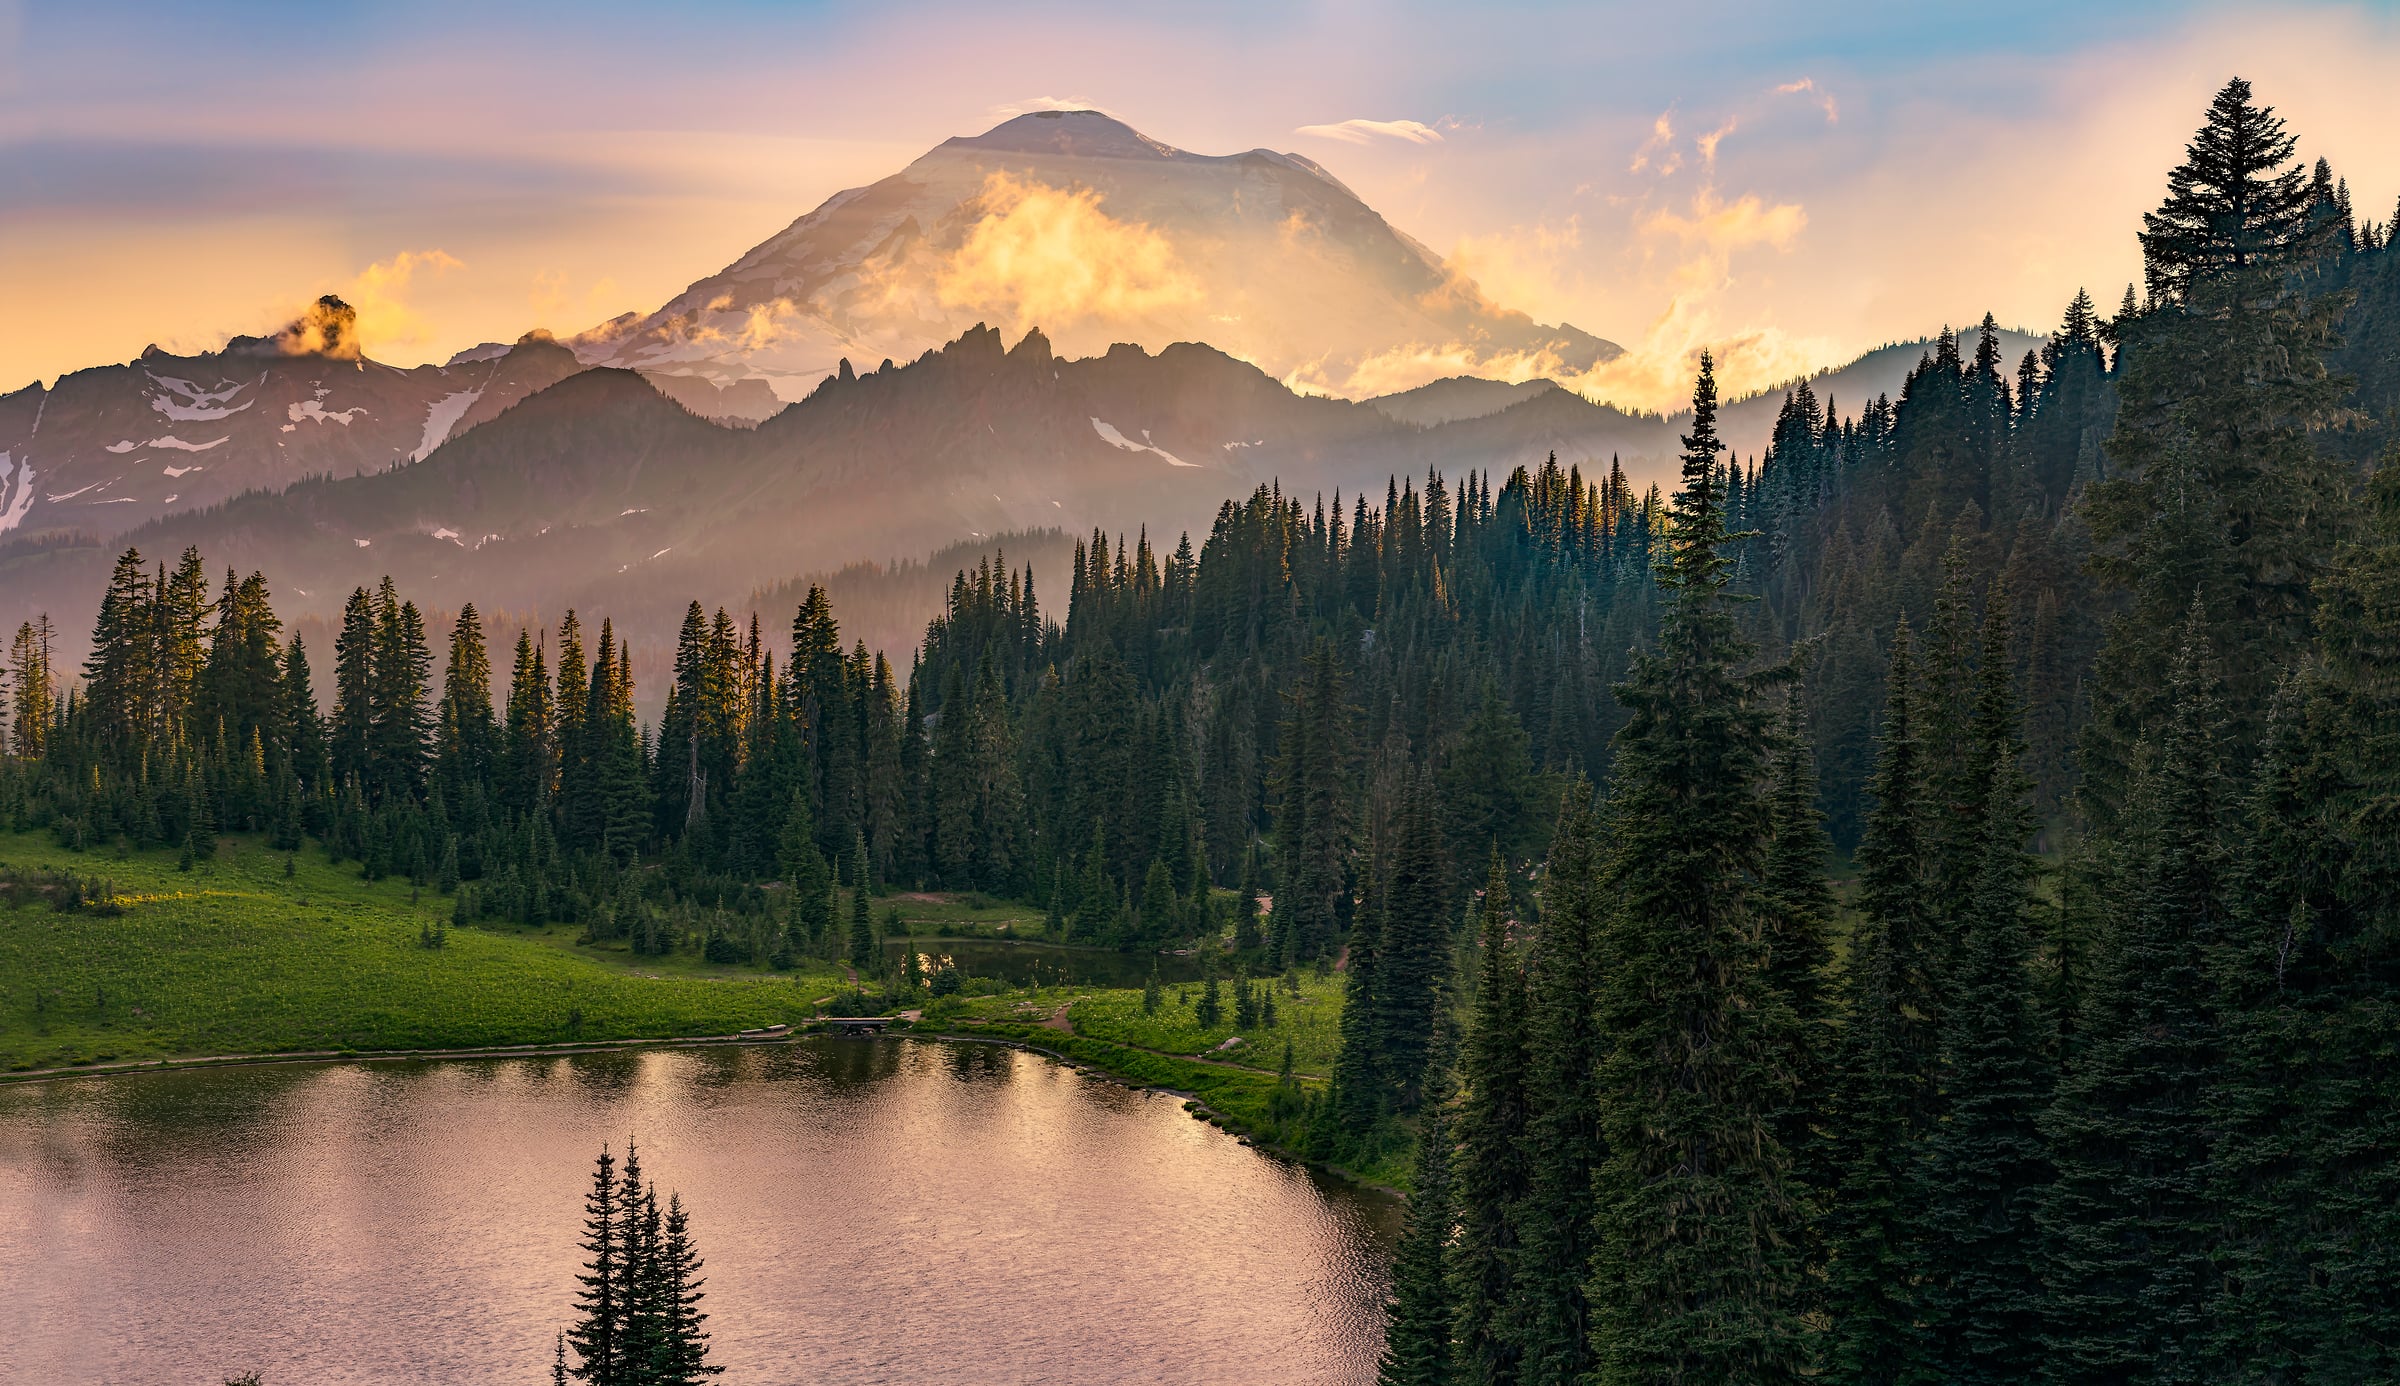 349 megapixels! A very high resolution, large-format VAST photo print of Mt Rainier at sunset with Tipsoo lake in the foreground; landscape photograph created by Chris Blake in Tipsoo Lake, Mount Rainier National Park, Washington